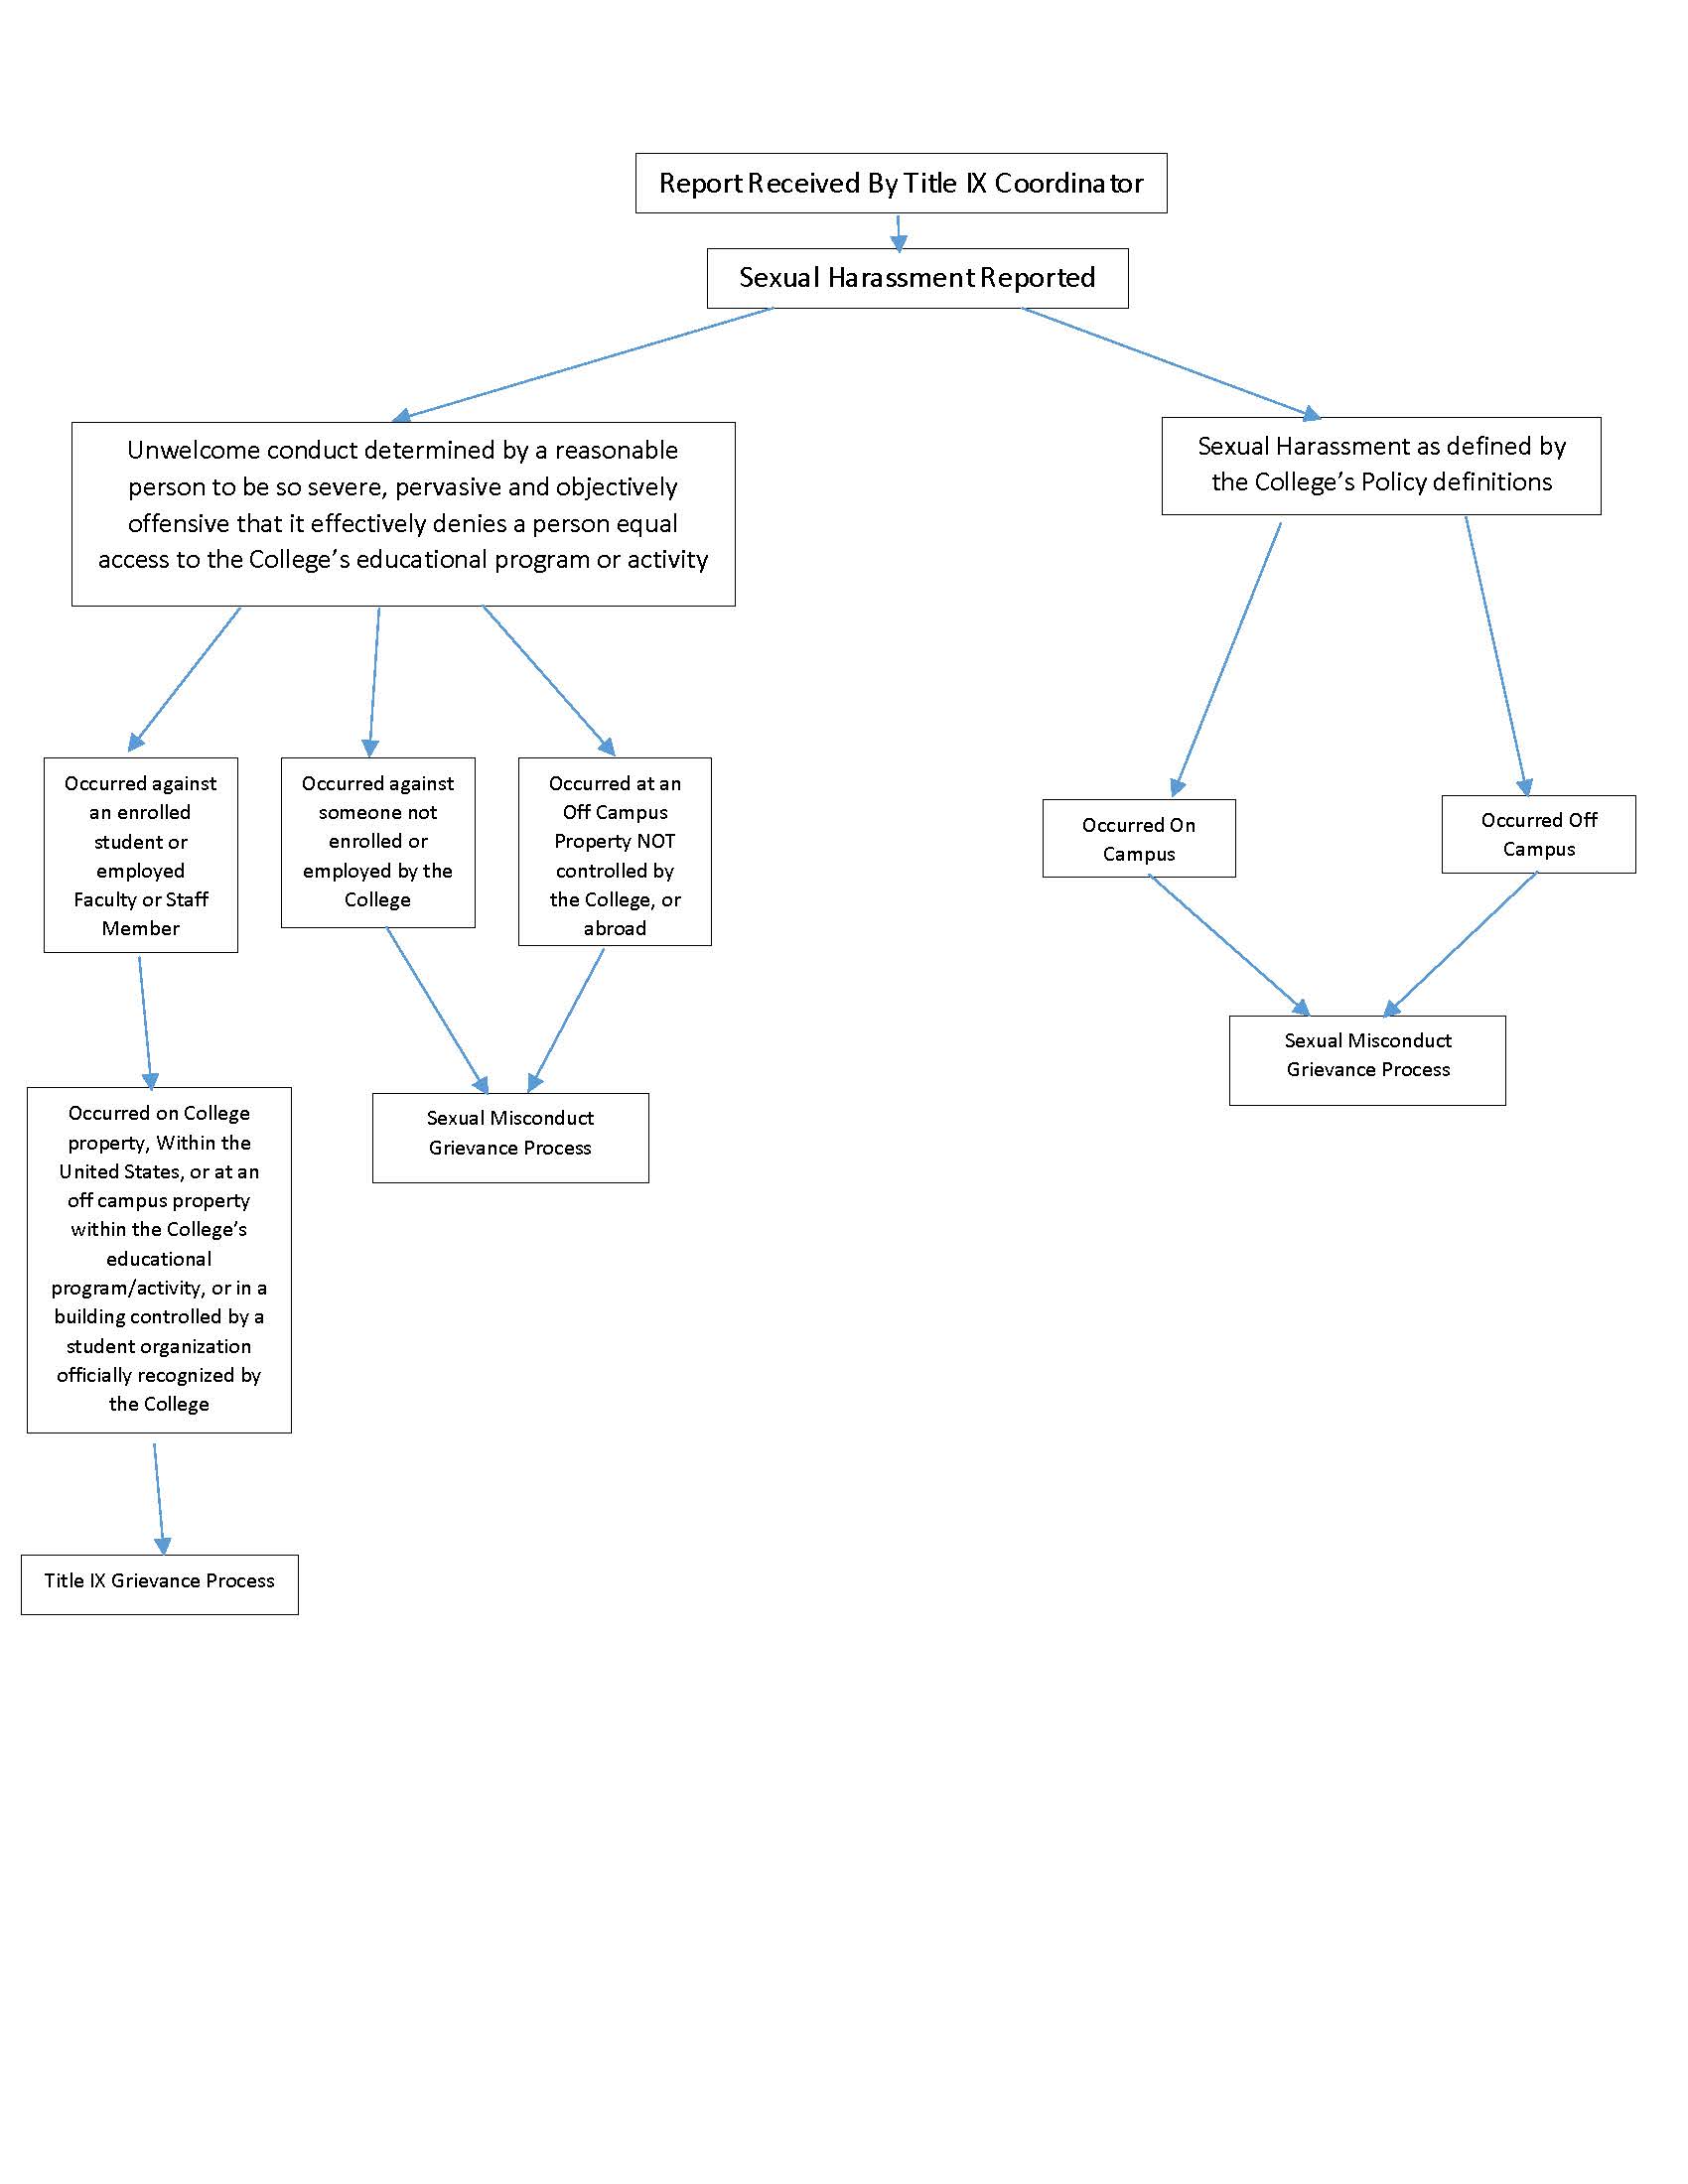 Assessment Flow Chart sexual harassment is reported - see text below for details